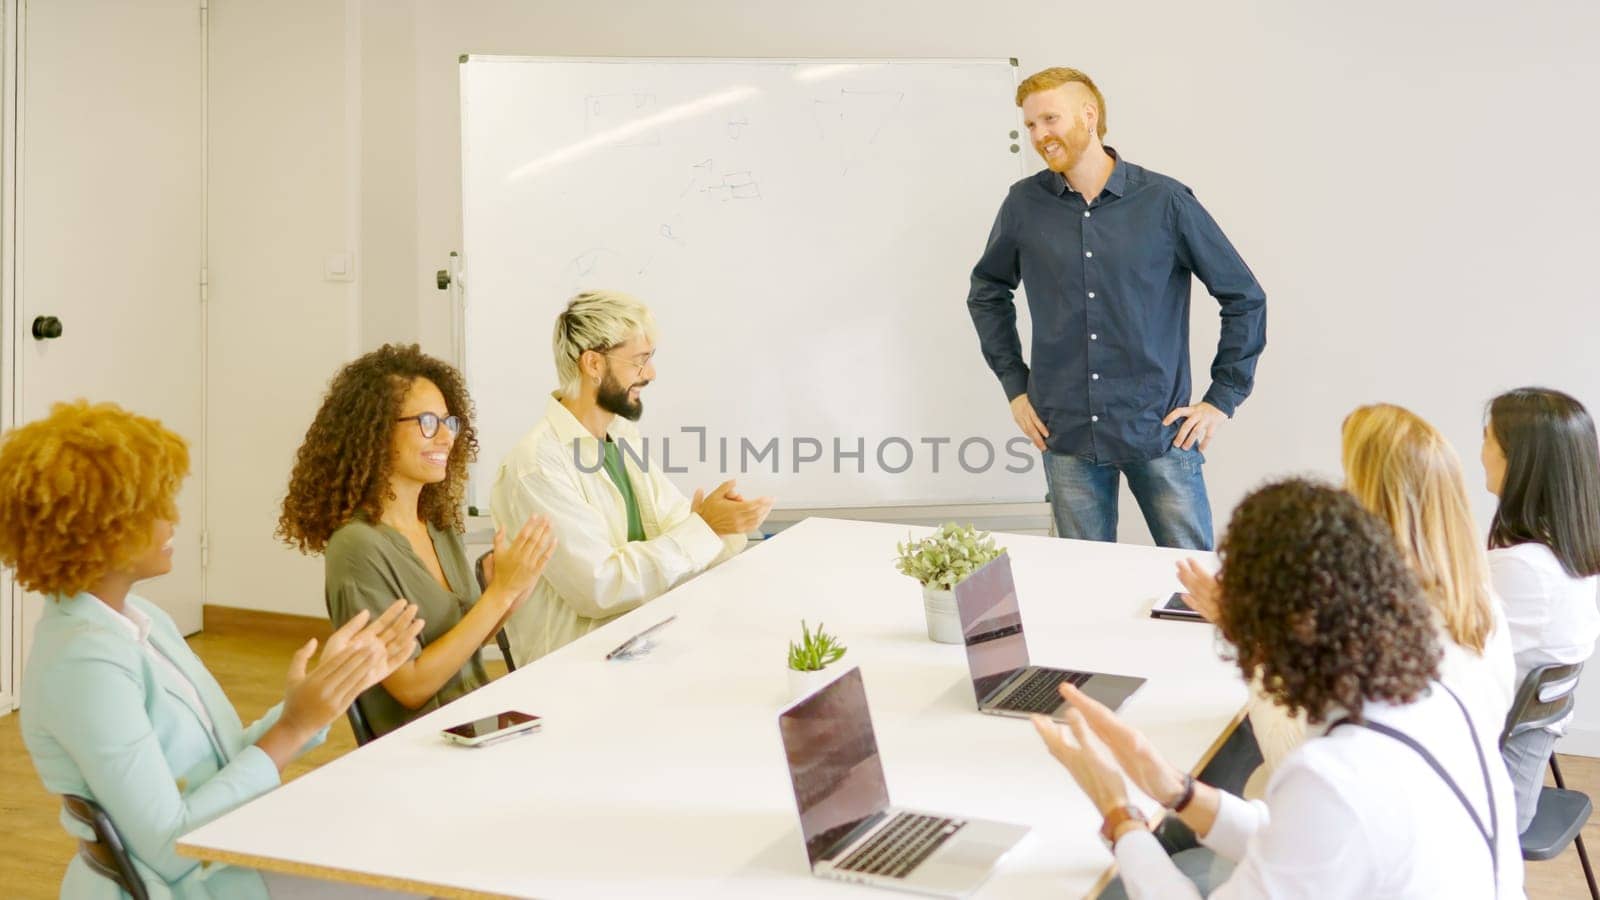 Team of coworkers applauding a man after a presentation in a meeting room